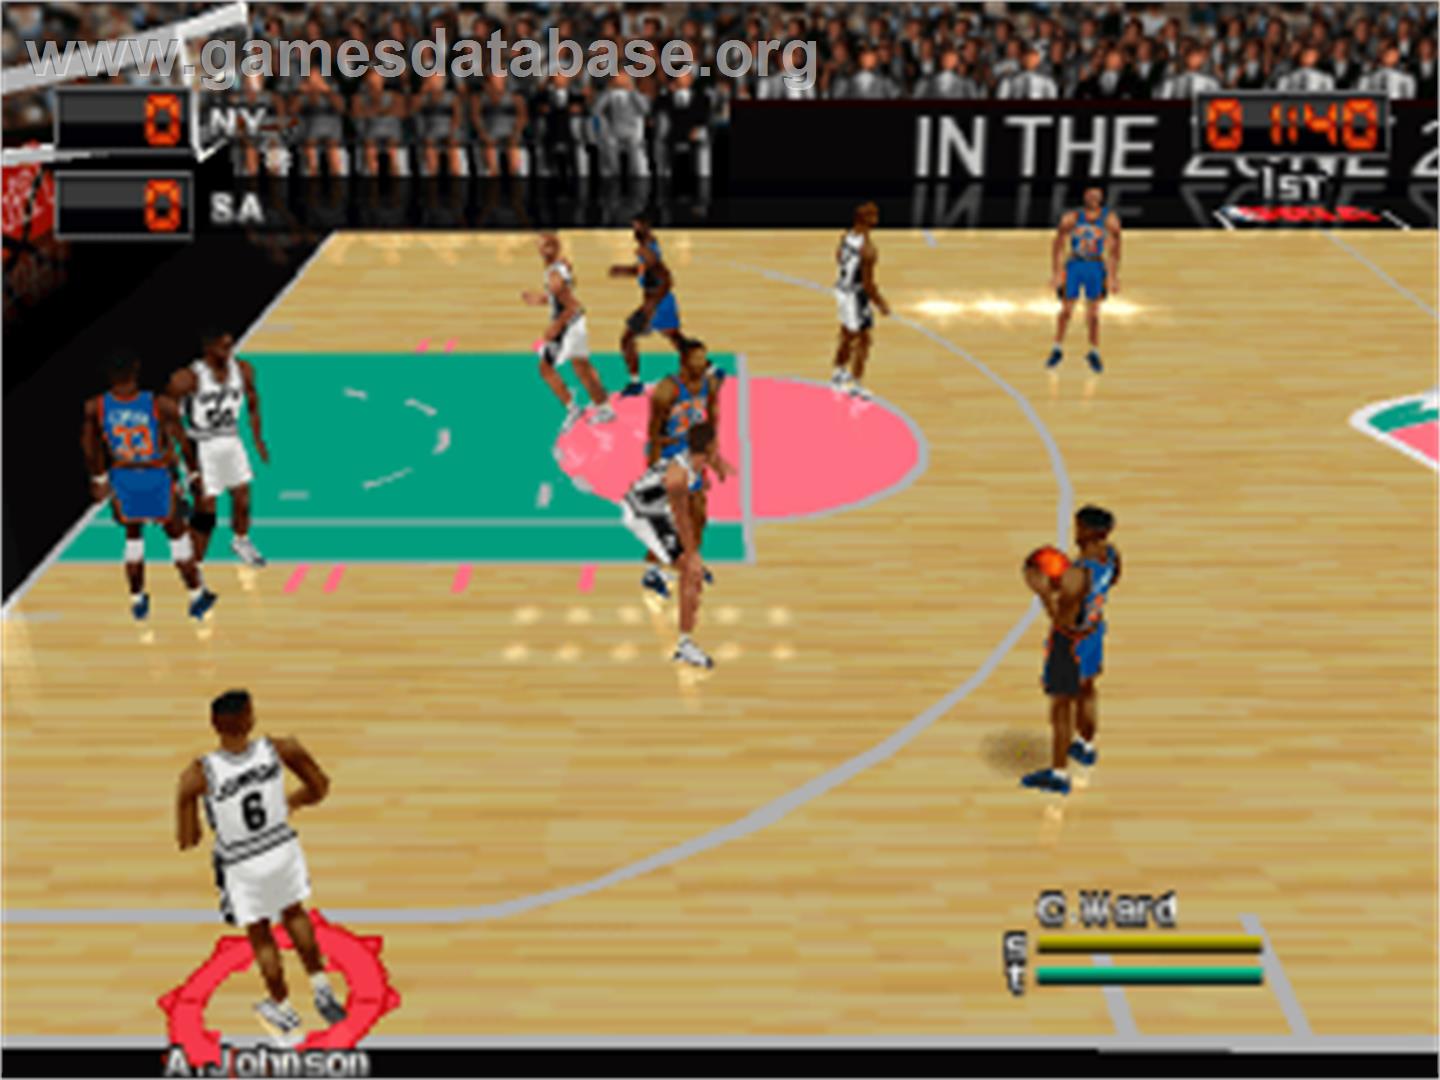 NBA in the Zone 2000 - Sony Playstation - Artwork - In Game